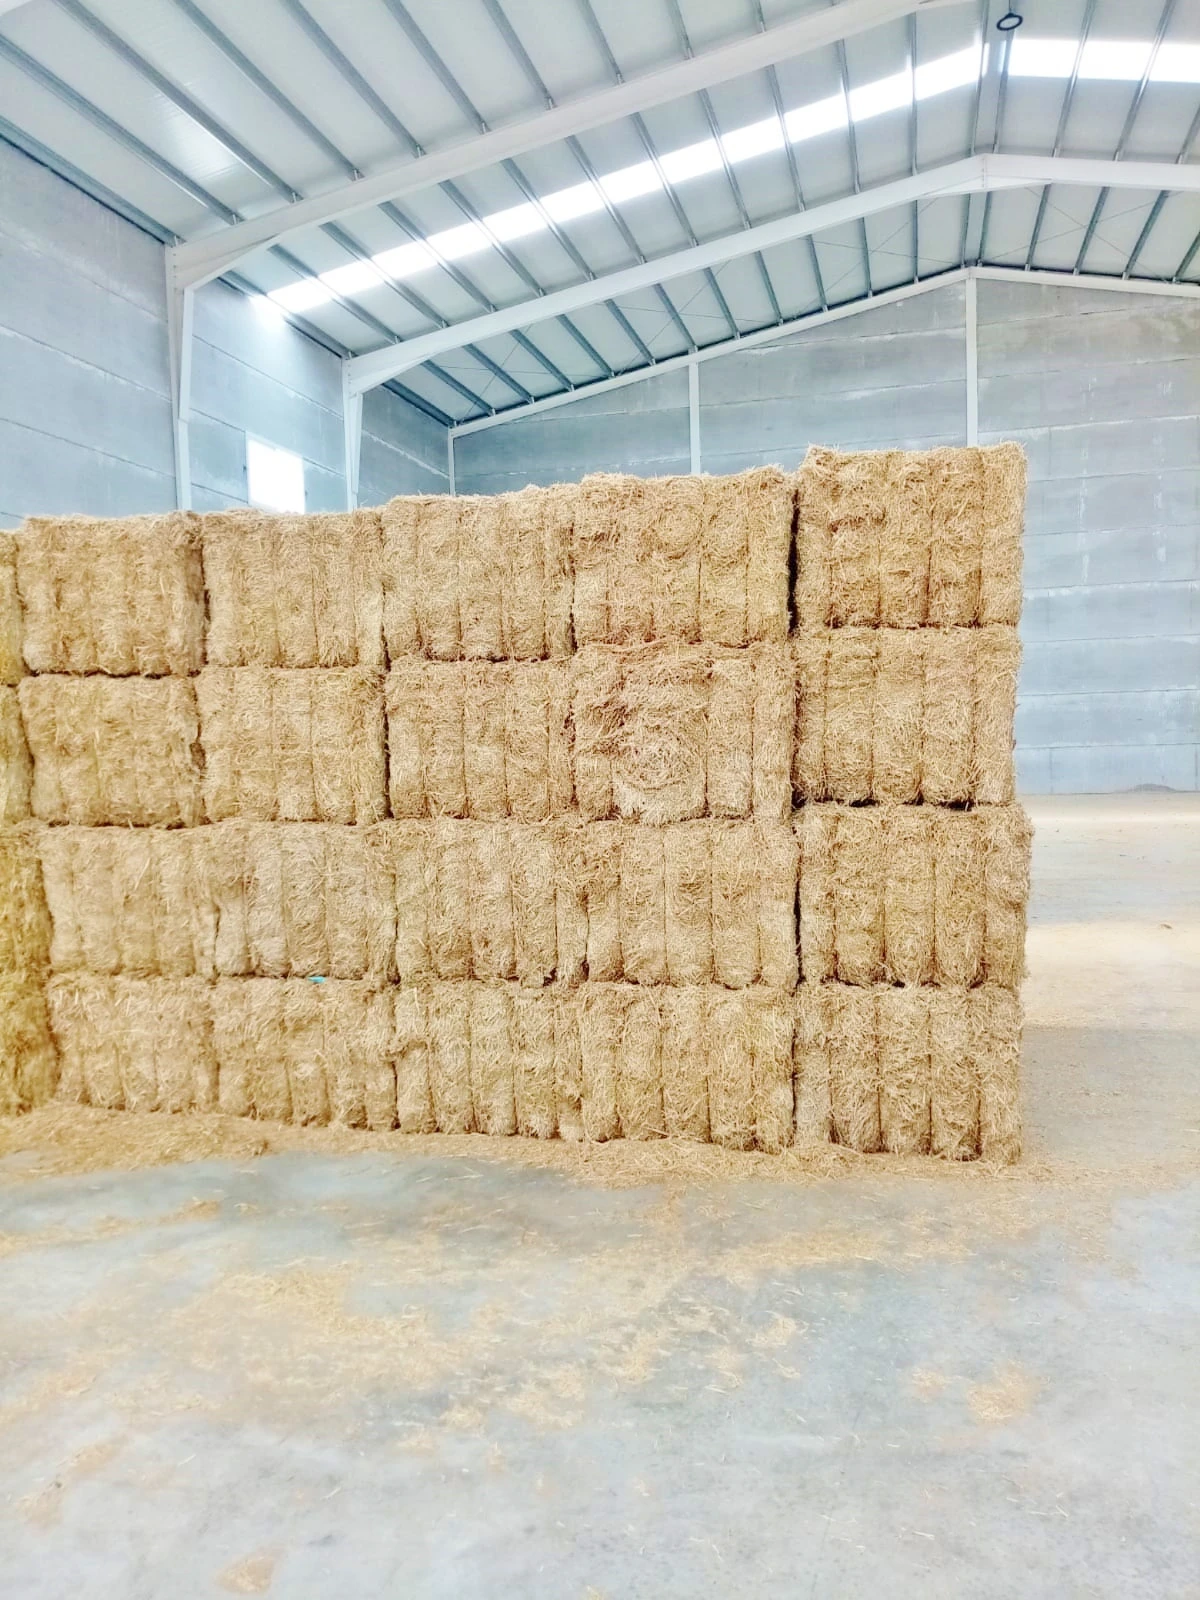 Quality Grade 100% Wheat Straw Hay Packed in 390KG Bales